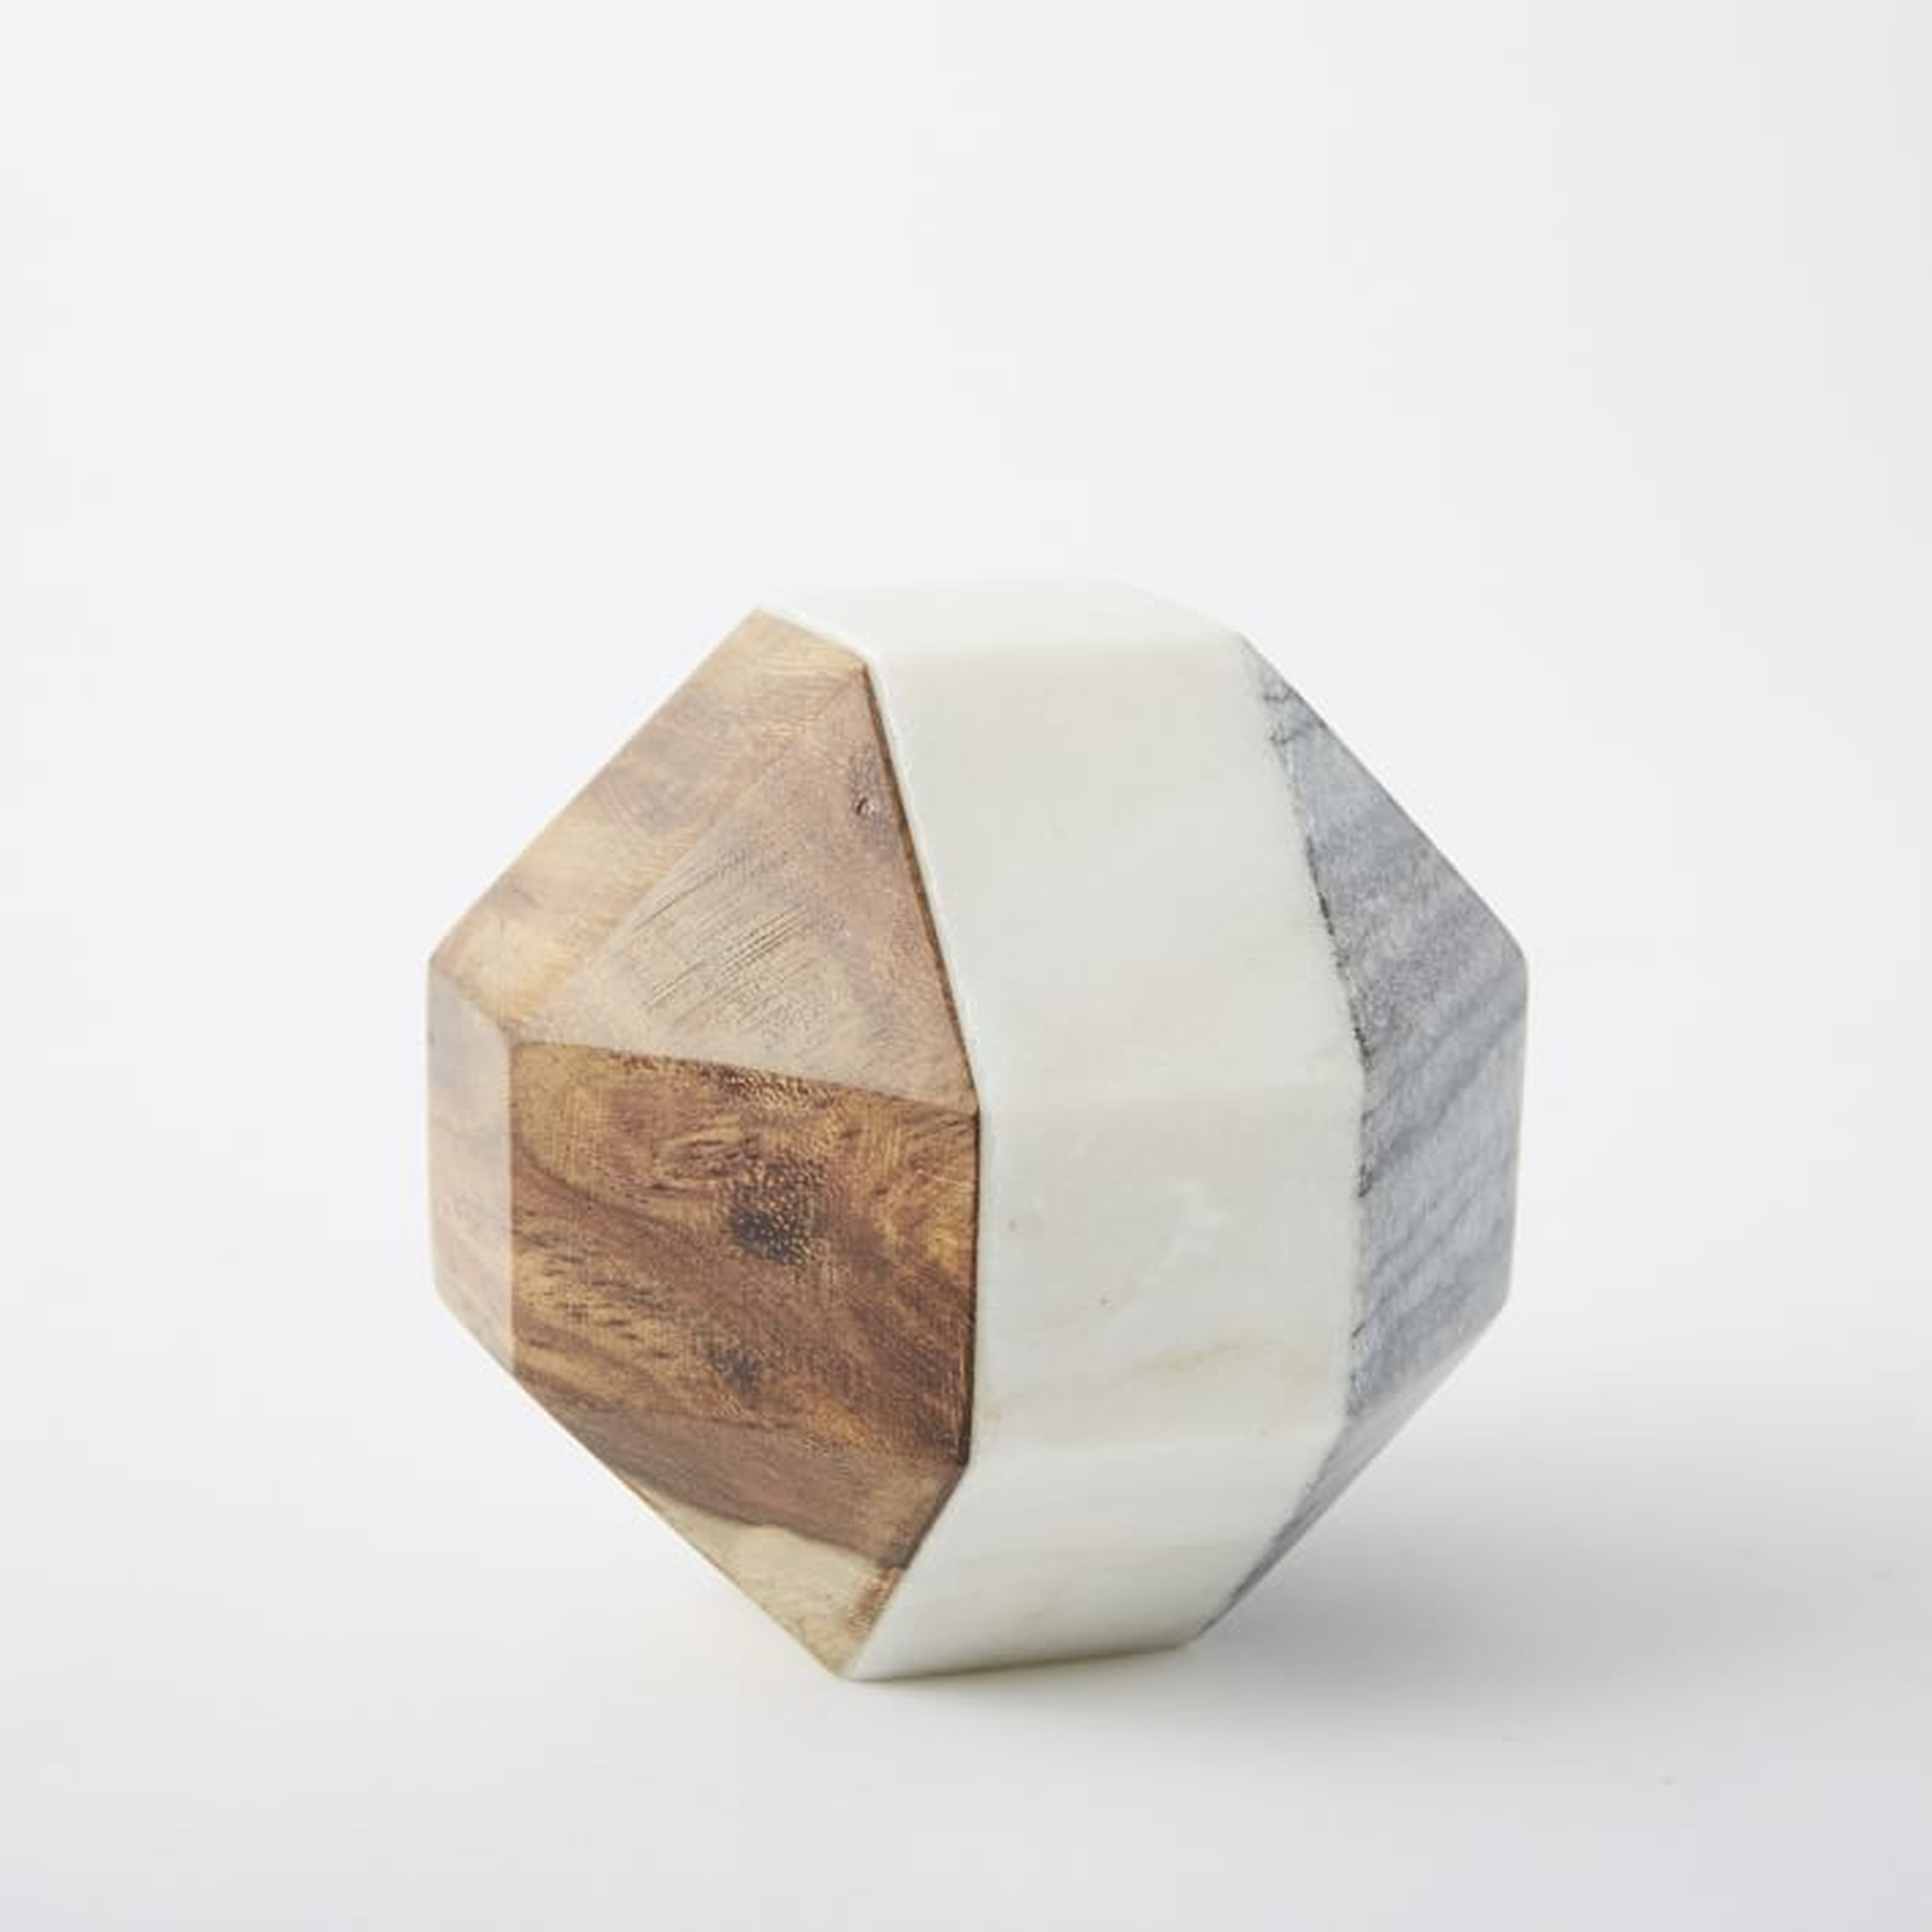 Marble & Wood Geometric Objects / Small - West Elm